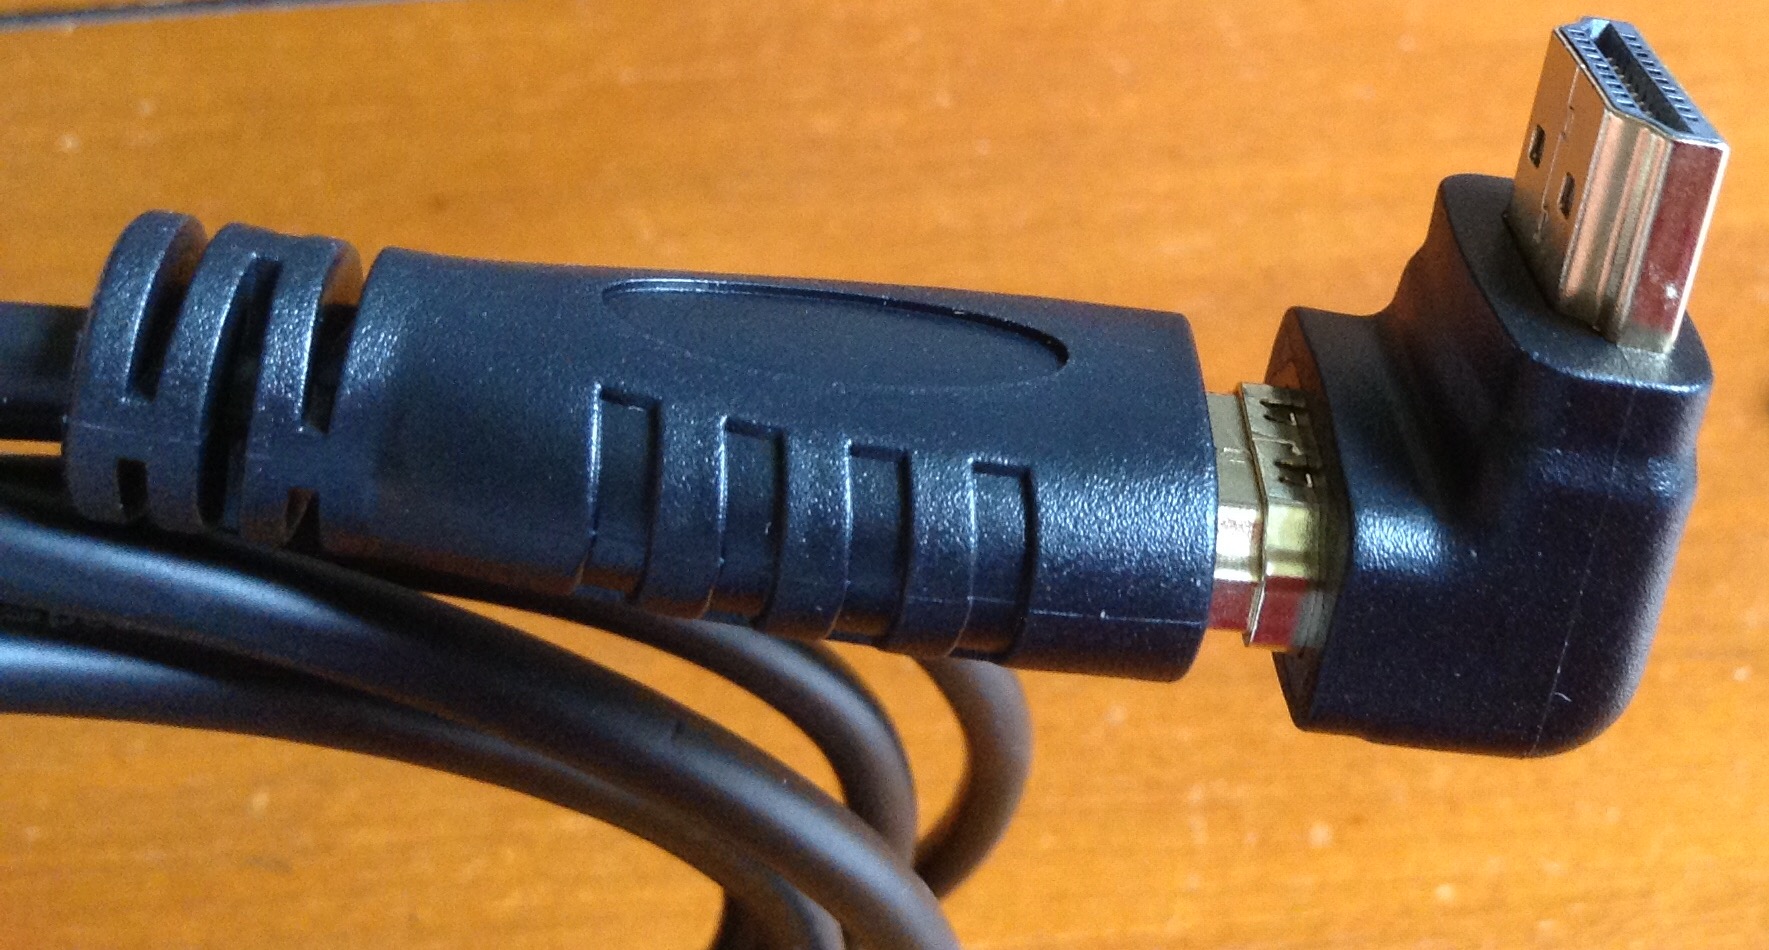 Latest Version HDMI Cables at a Reasonable Cost